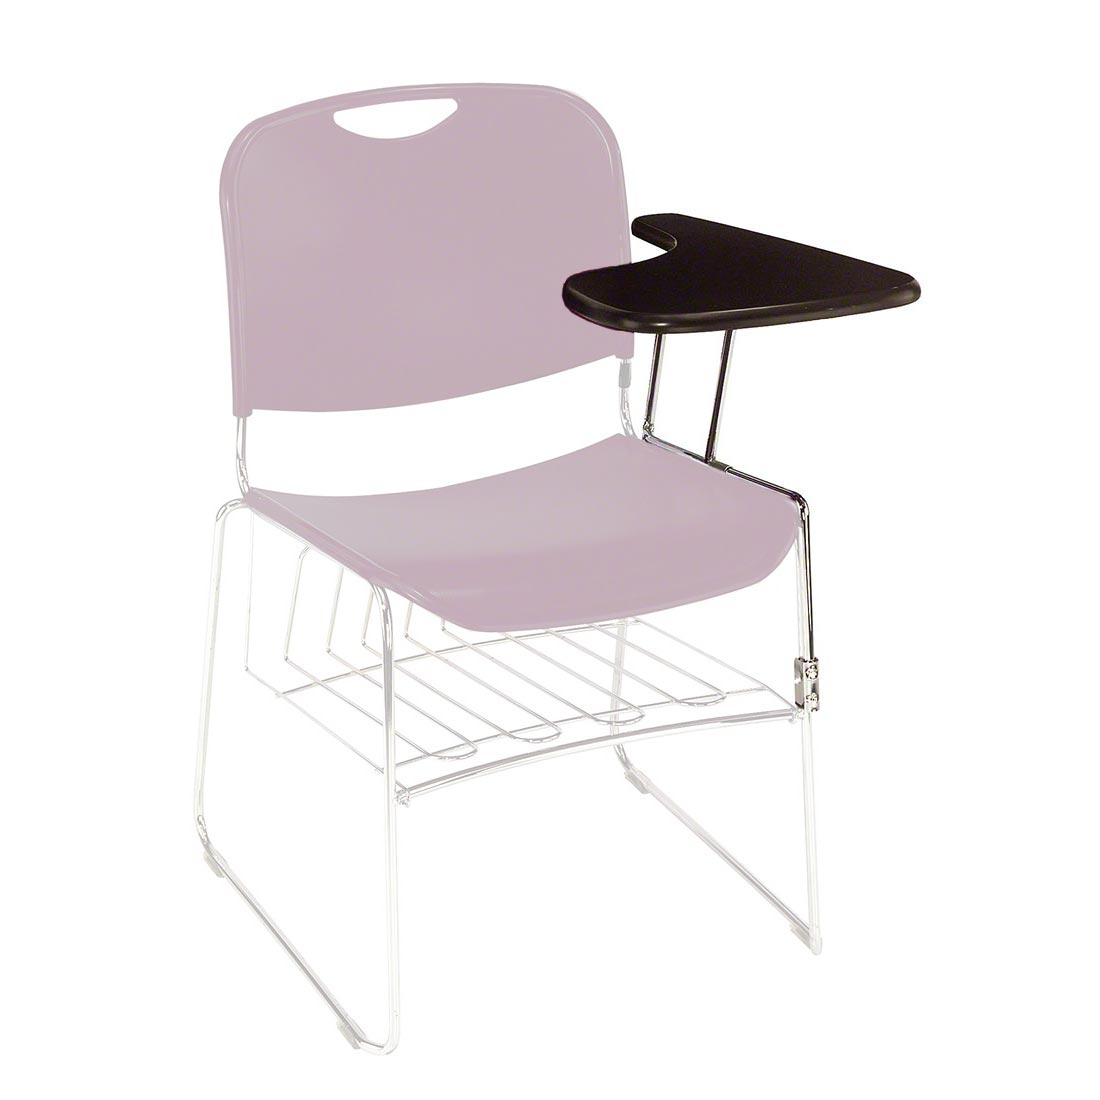 MODEL MT-902 Plastic Injection moulded shell Back and Seat